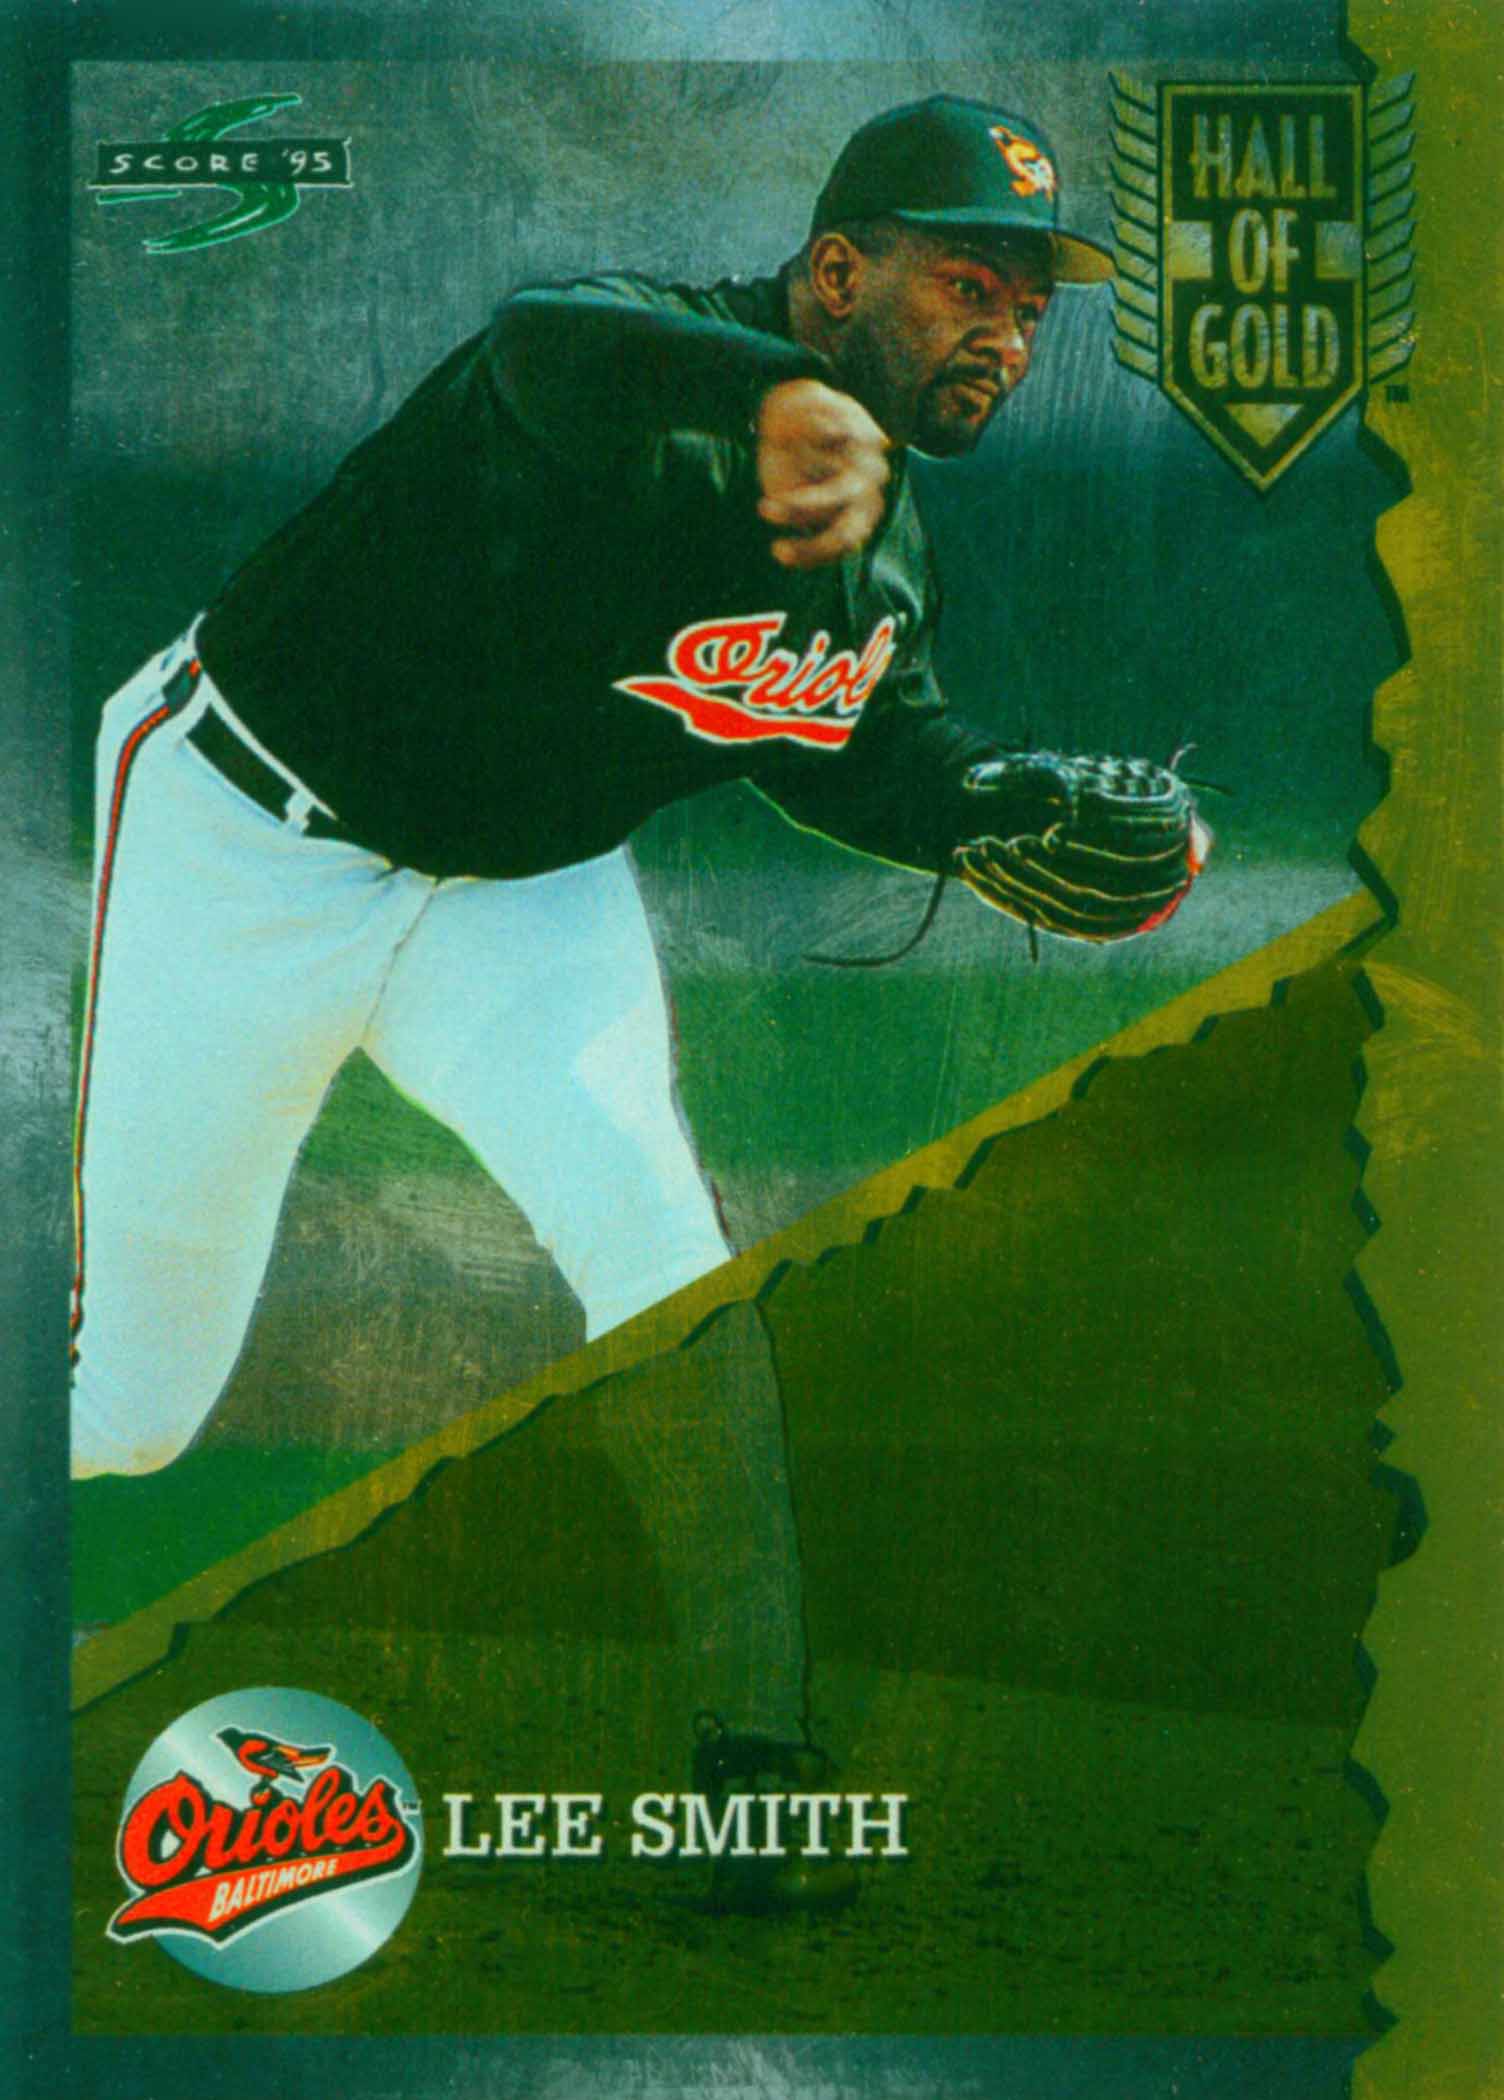 1995 Score Hall of Gold